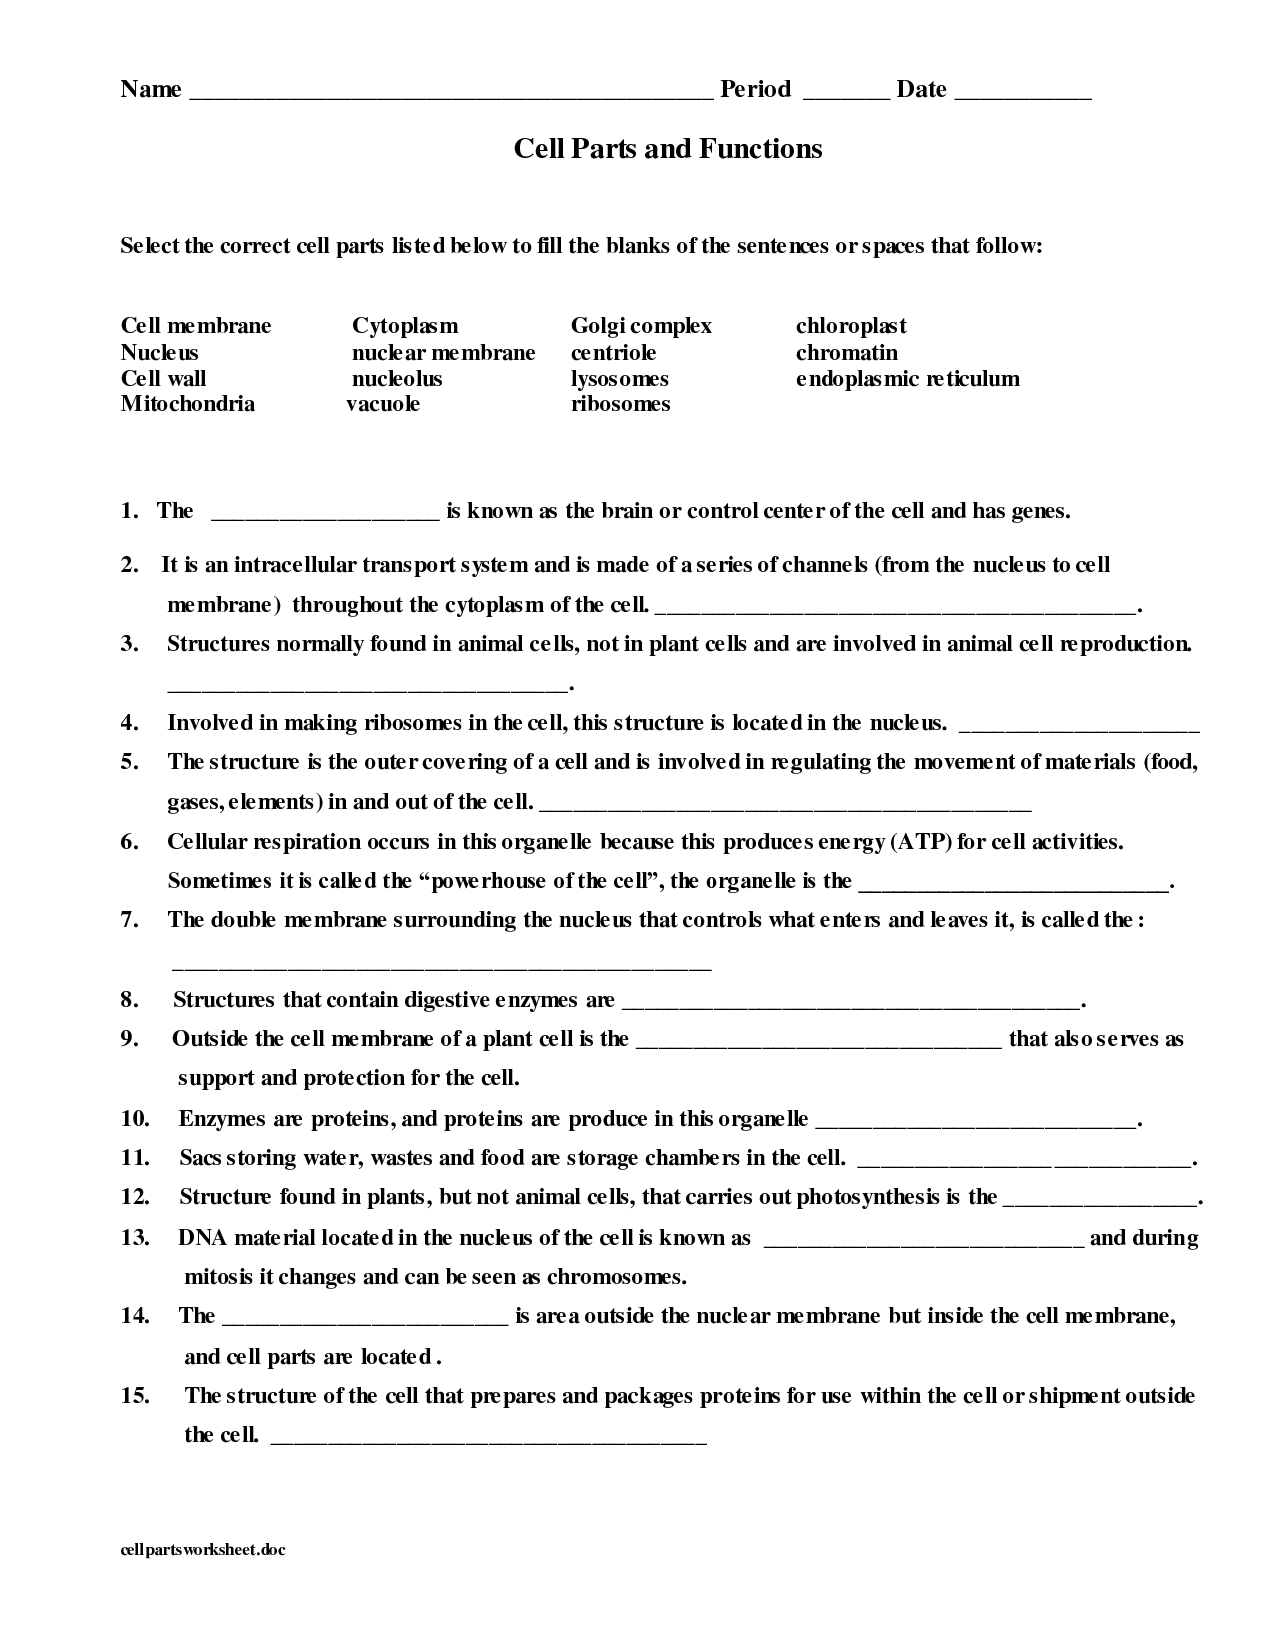 Cell Parts And Functions Worksheet Answers